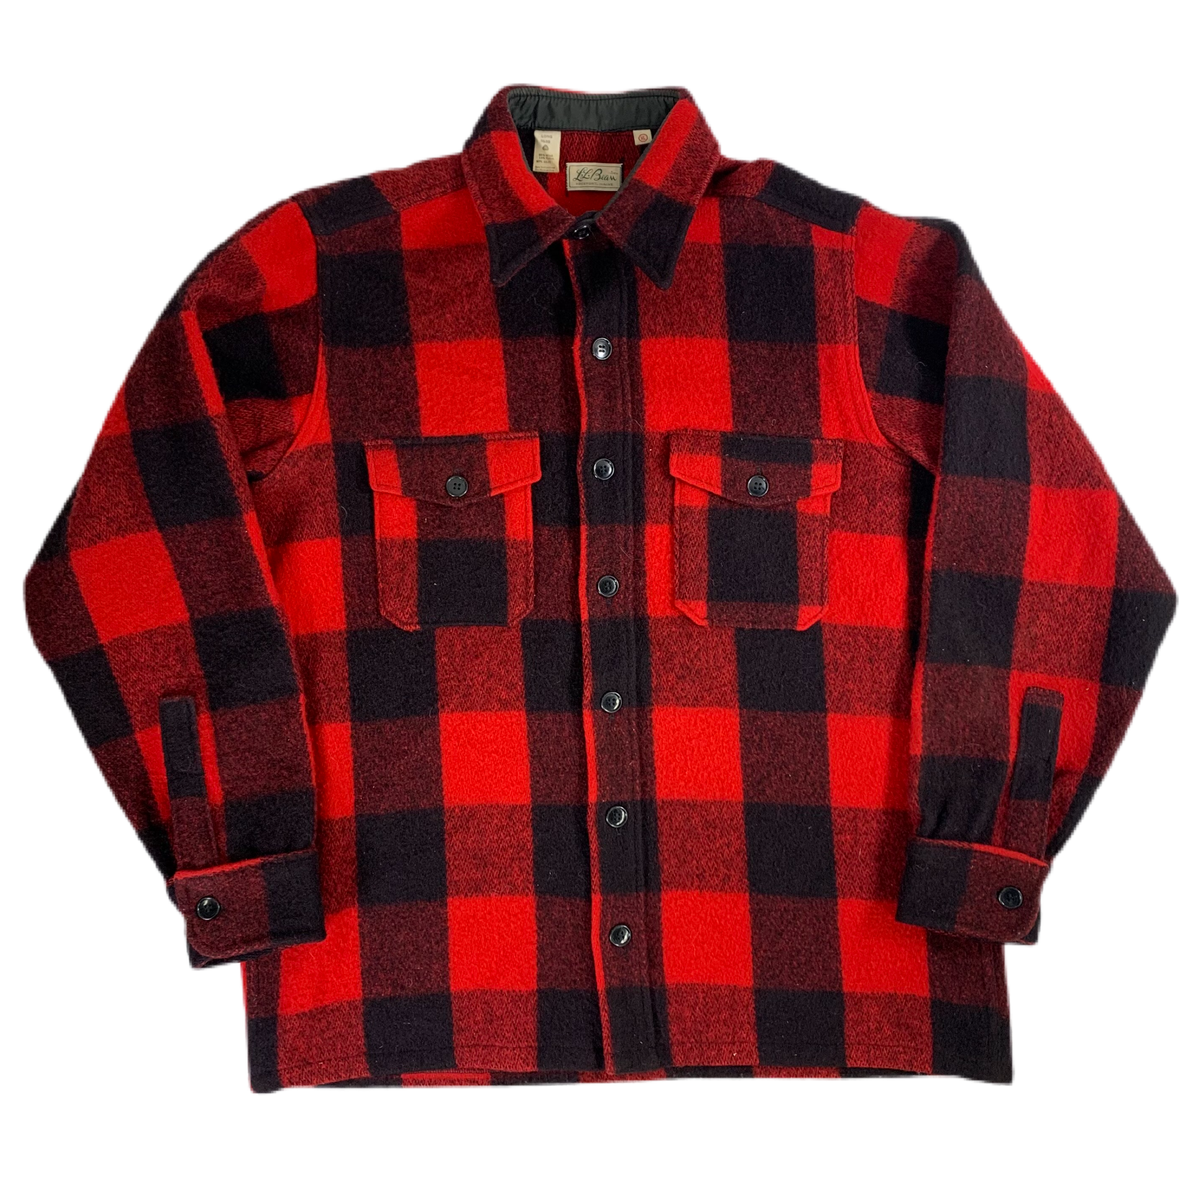 Classic LLBEAN Wool Hunting Jacket with Flannel Plaid Design